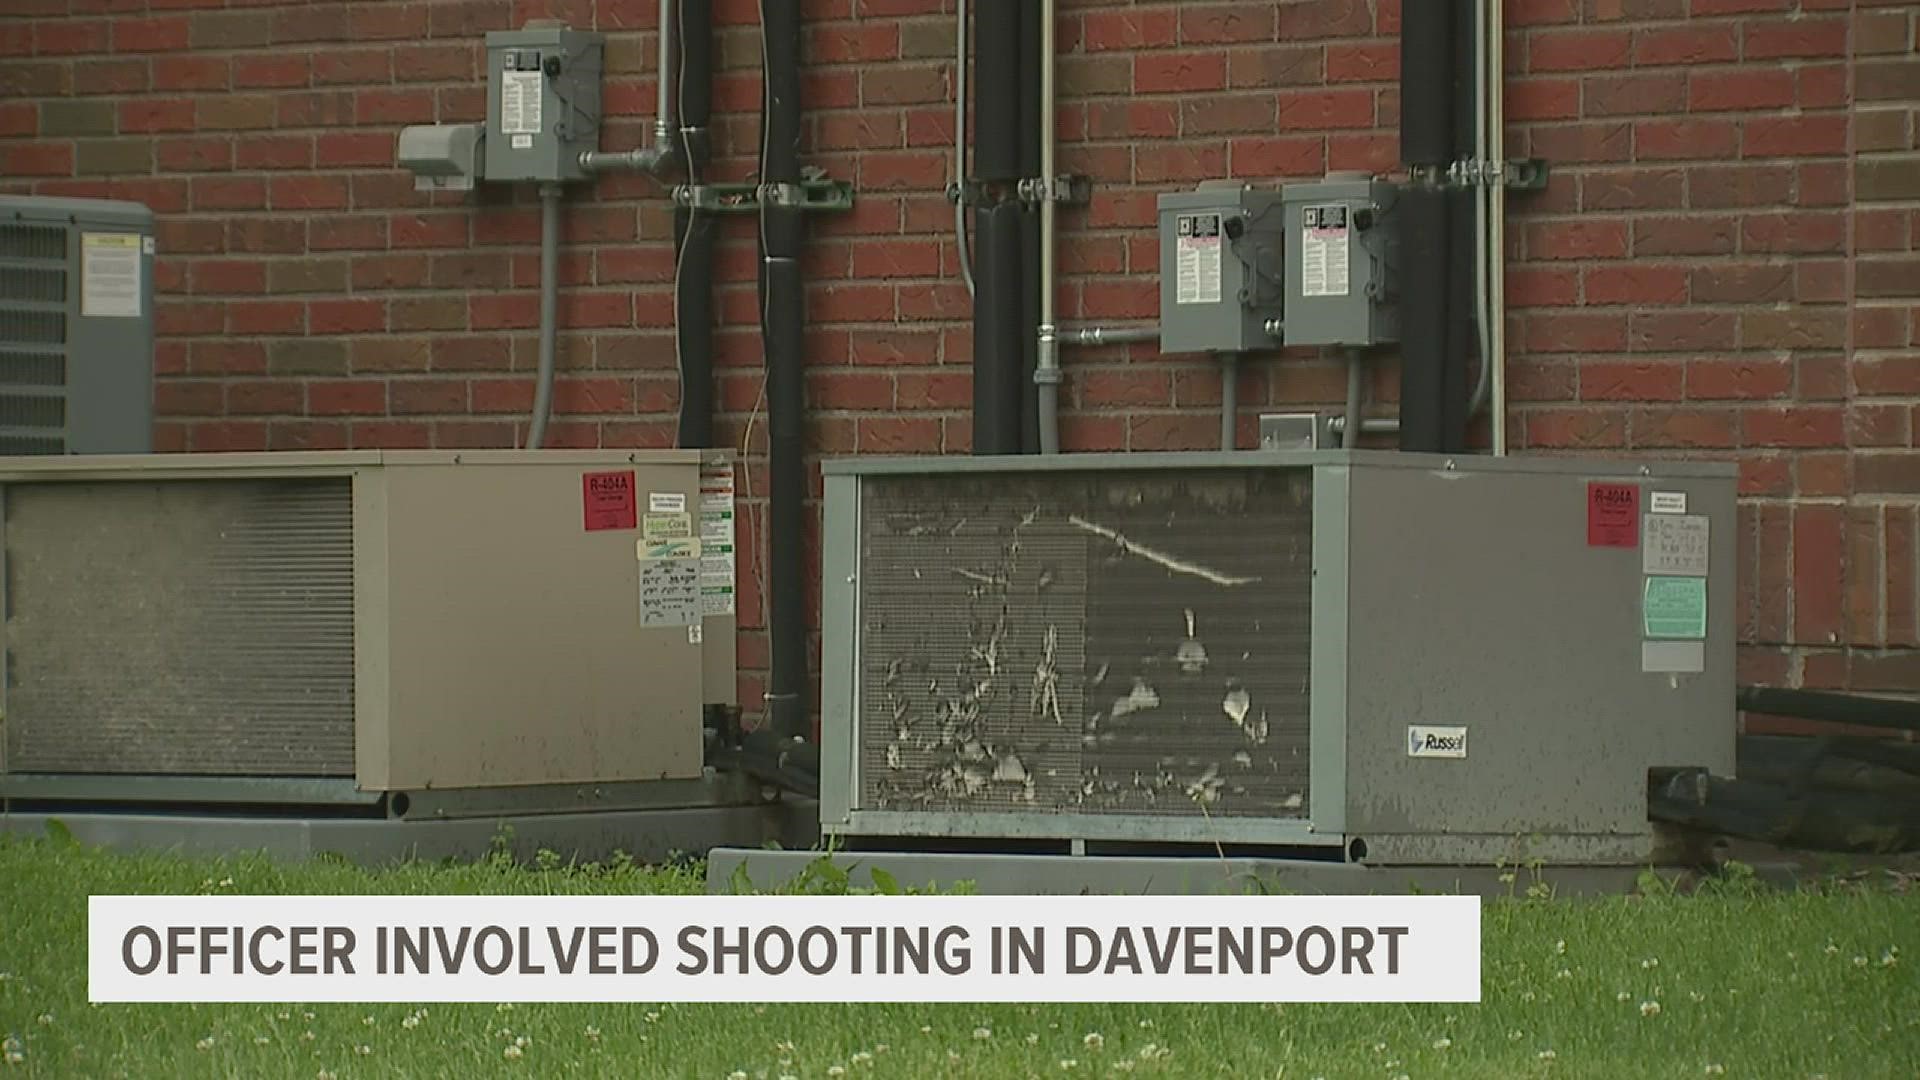 A man was shot and later died after a physical confrontation with a Davenport police officer, the department said. The officer is now on administrative leave.